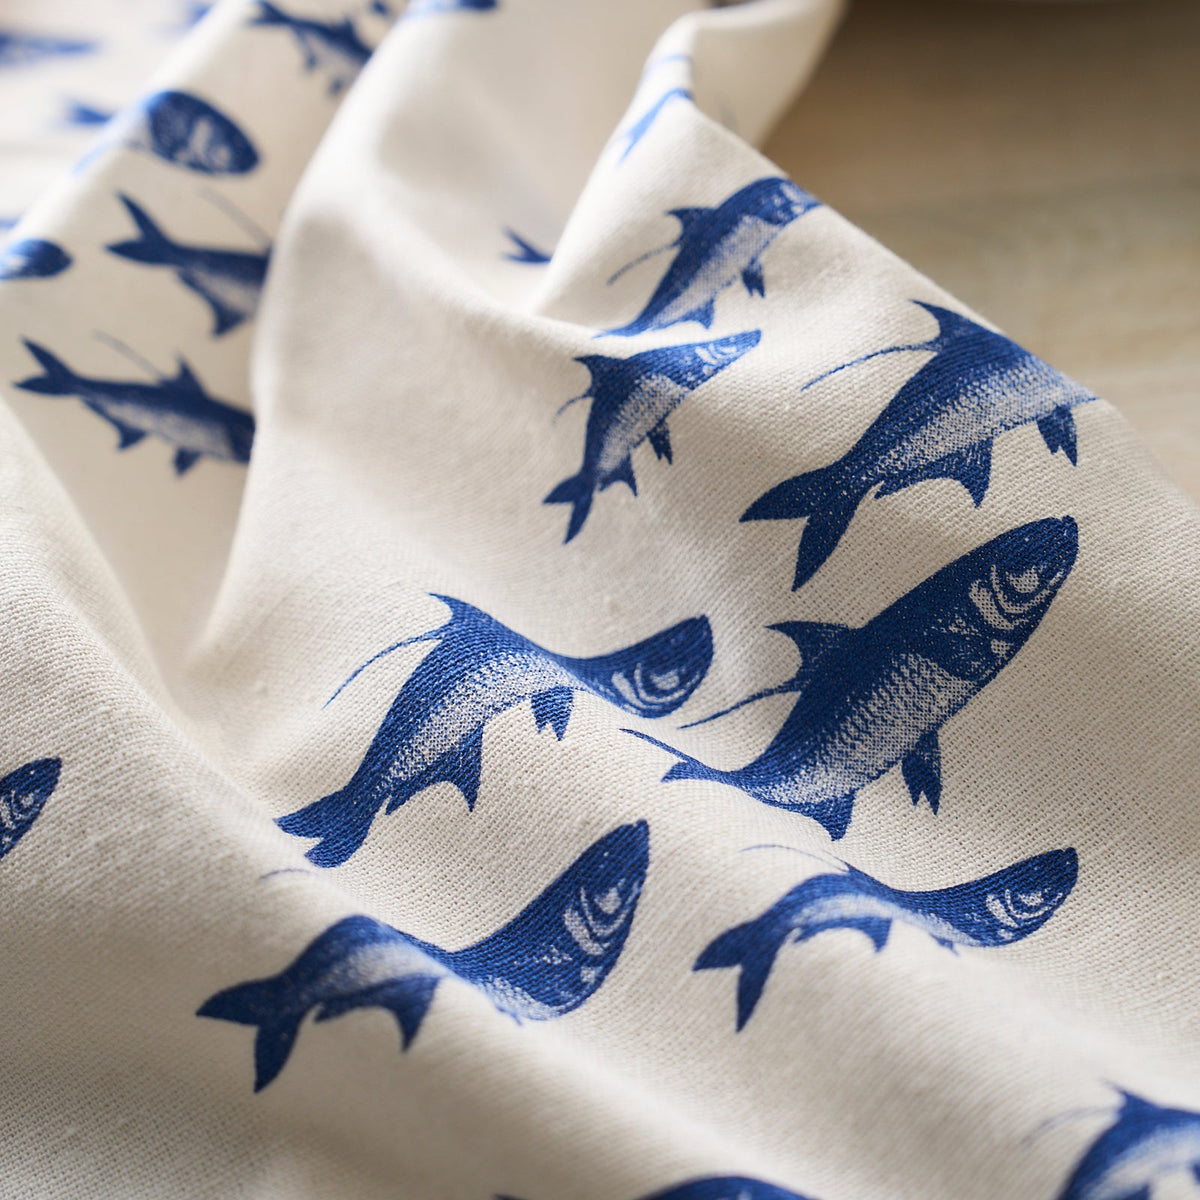 White fabric with a blue fish pattern, from the Caskata School of Fish Kitchen Towels, Set of 2 collection, draped elegantly over a surface.